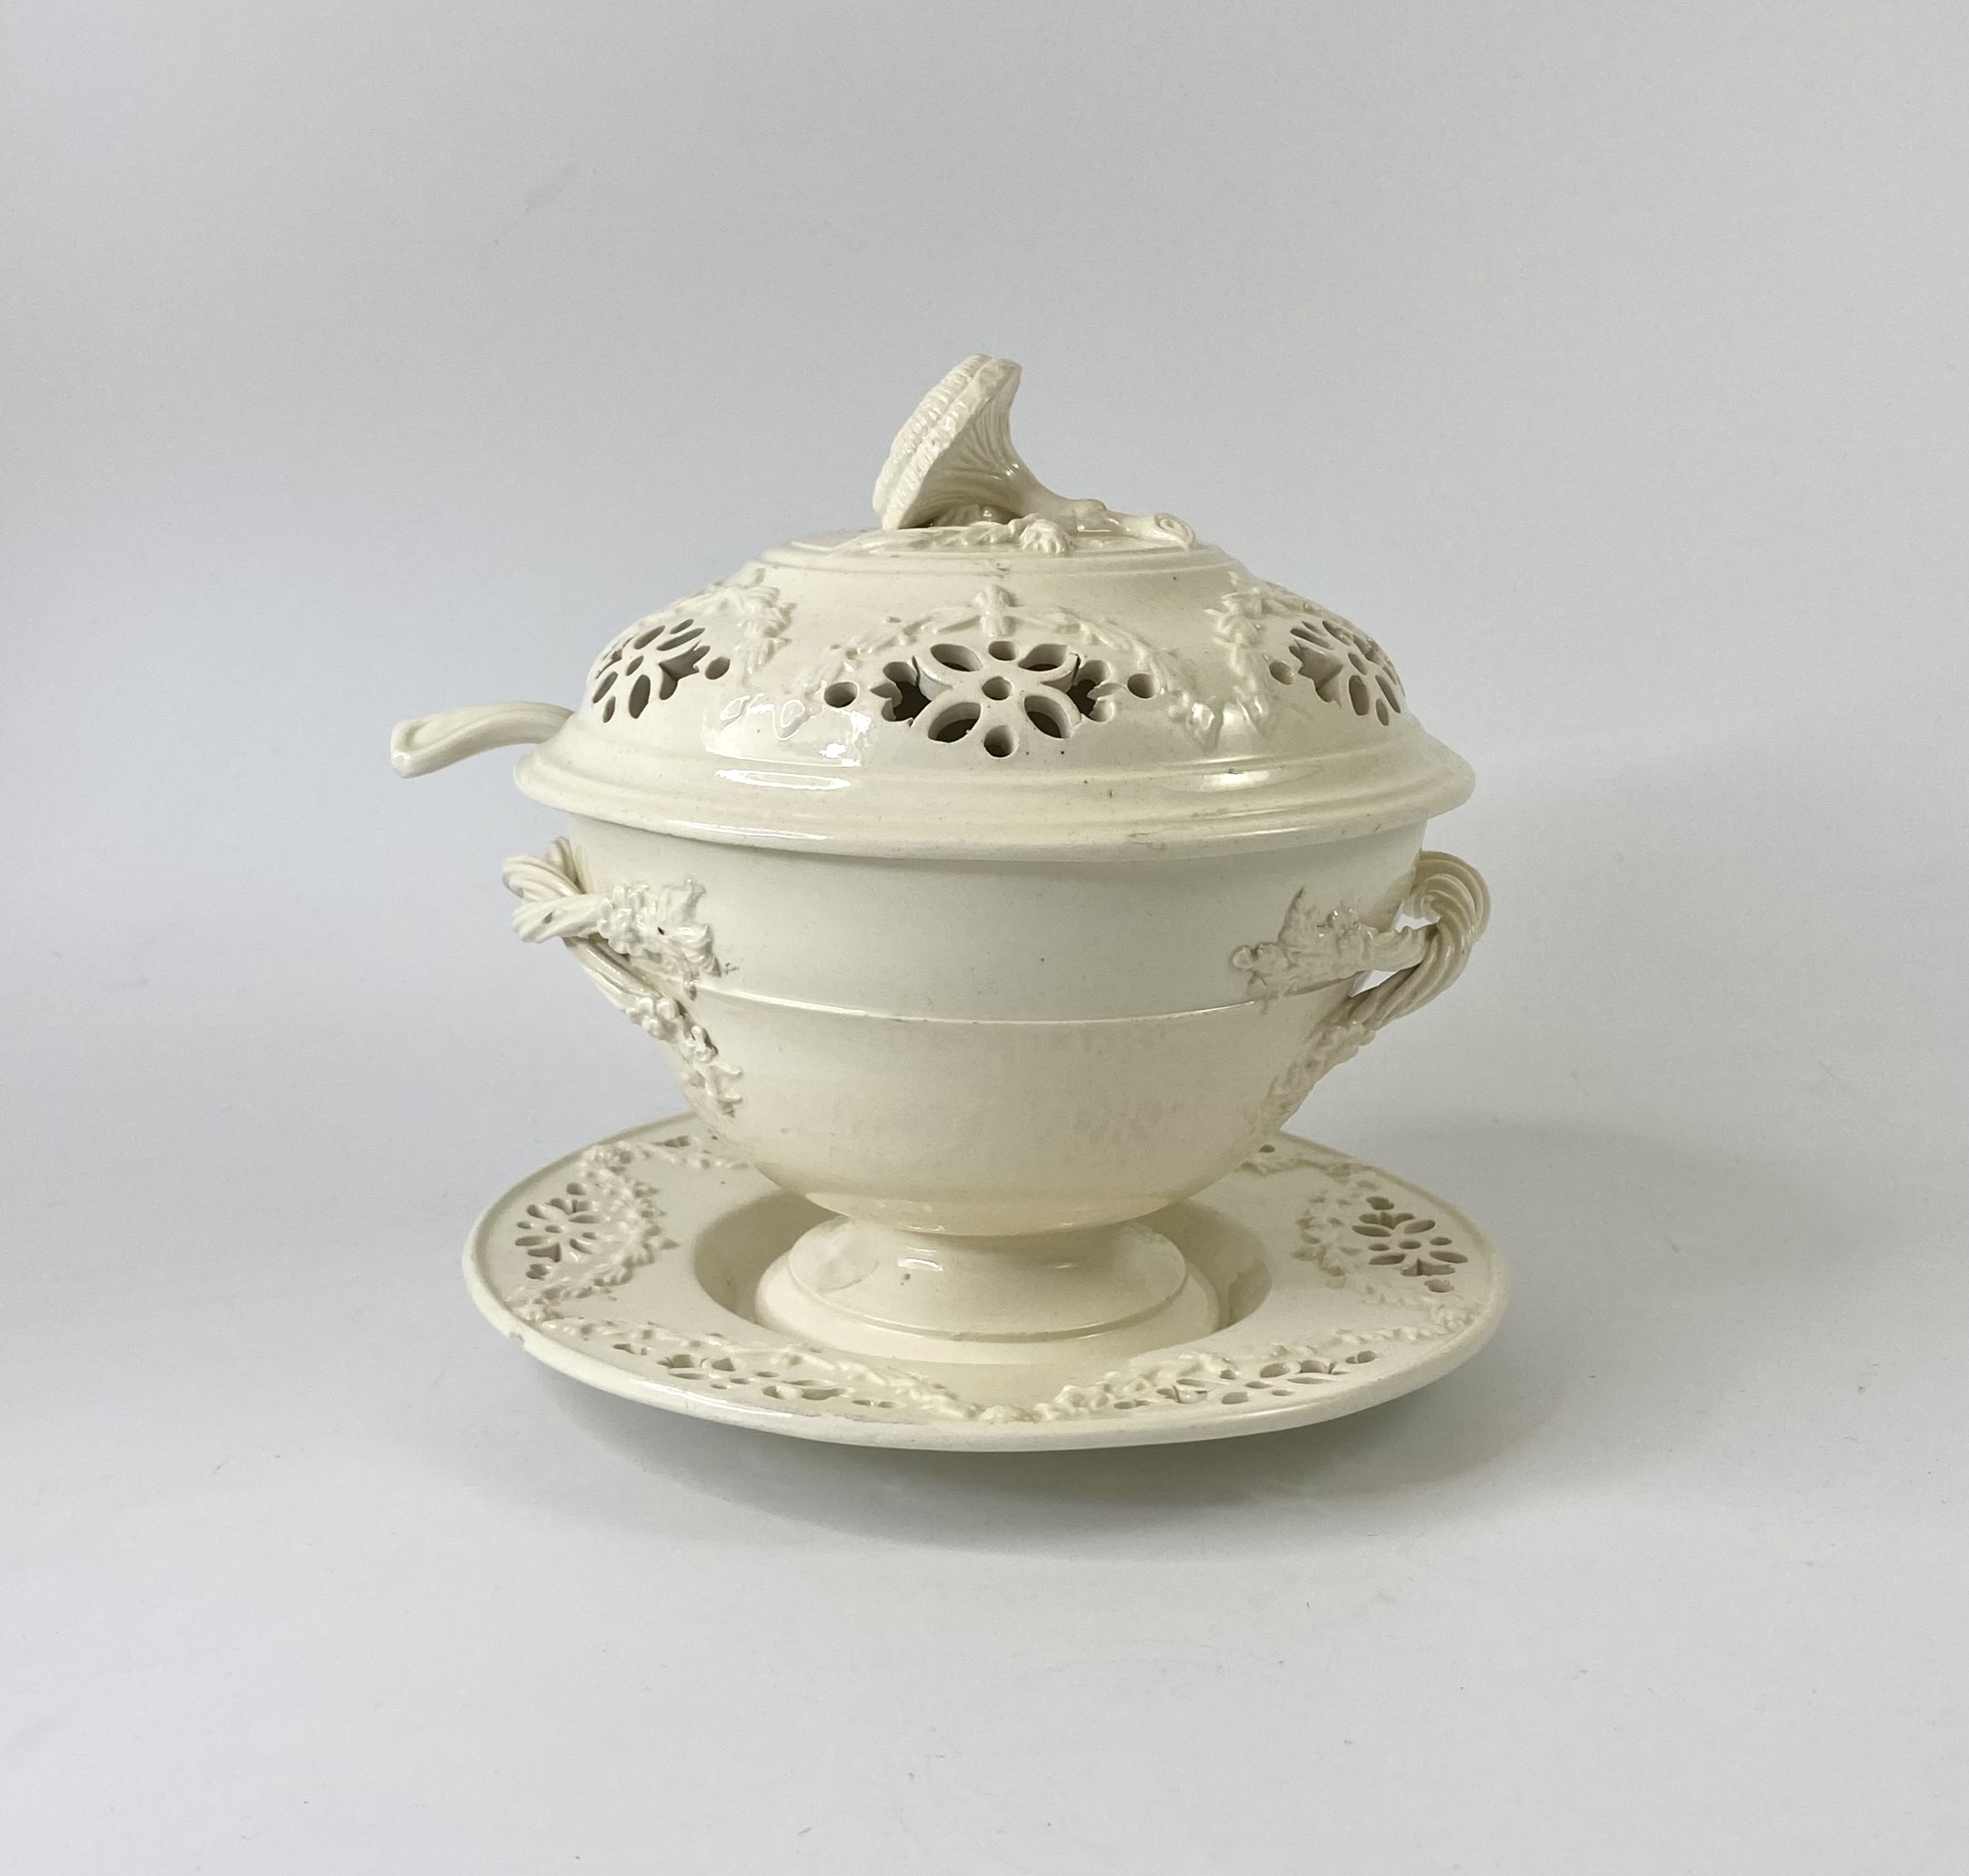 English creamware tureen, cover, stand and ladle, c. 1790